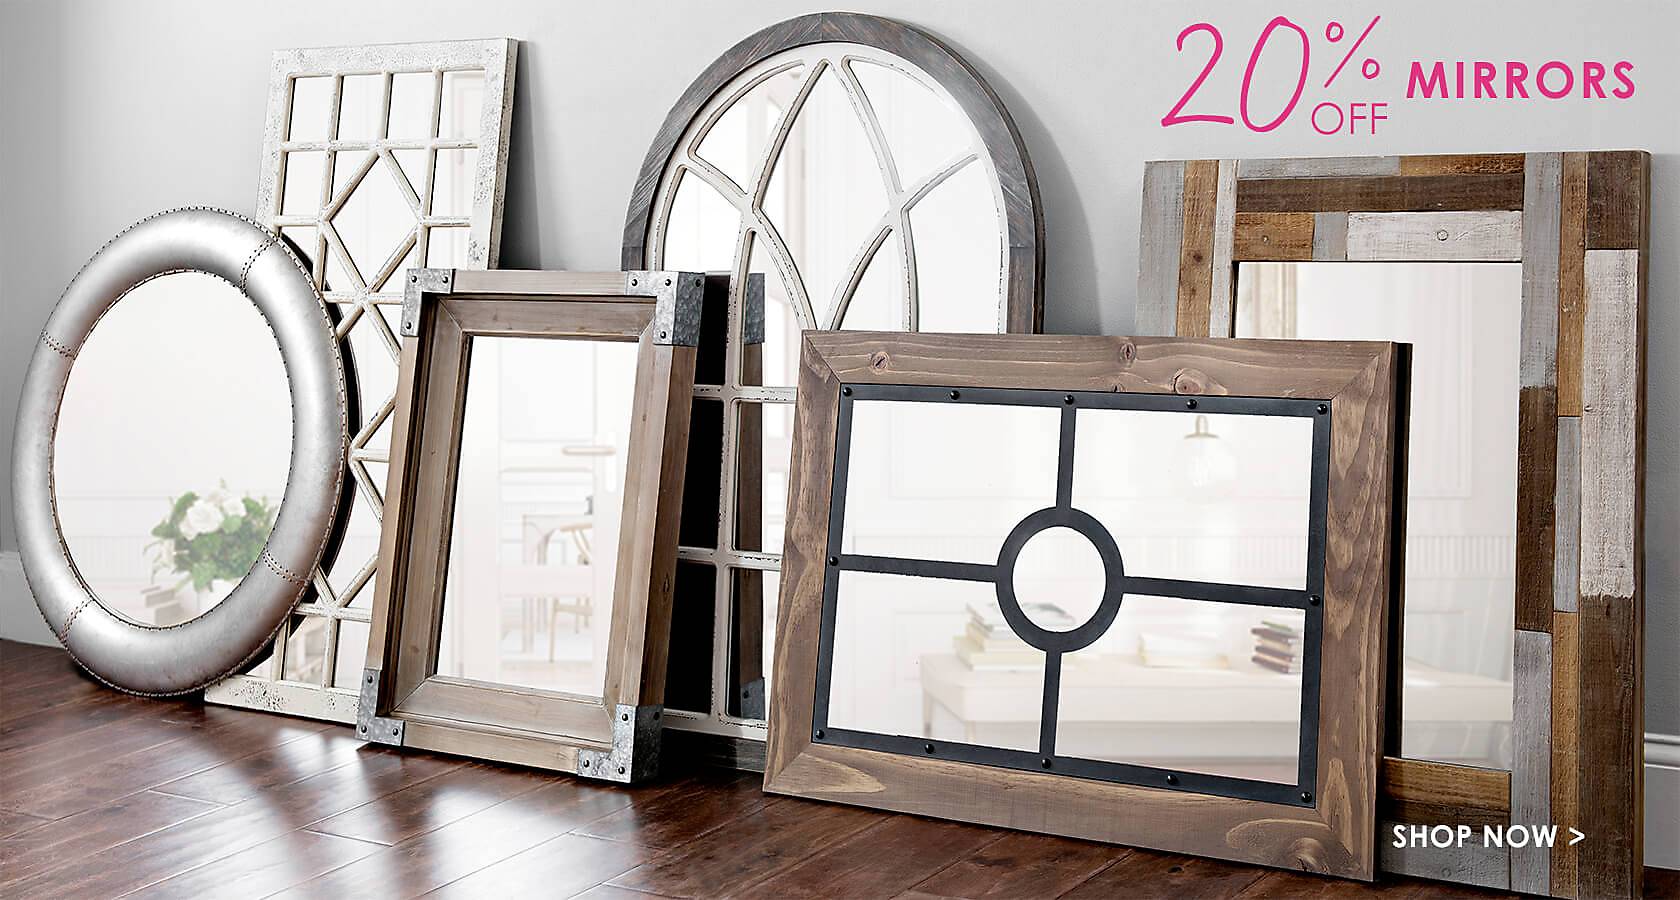 20% Off Mirrors - Shop Now